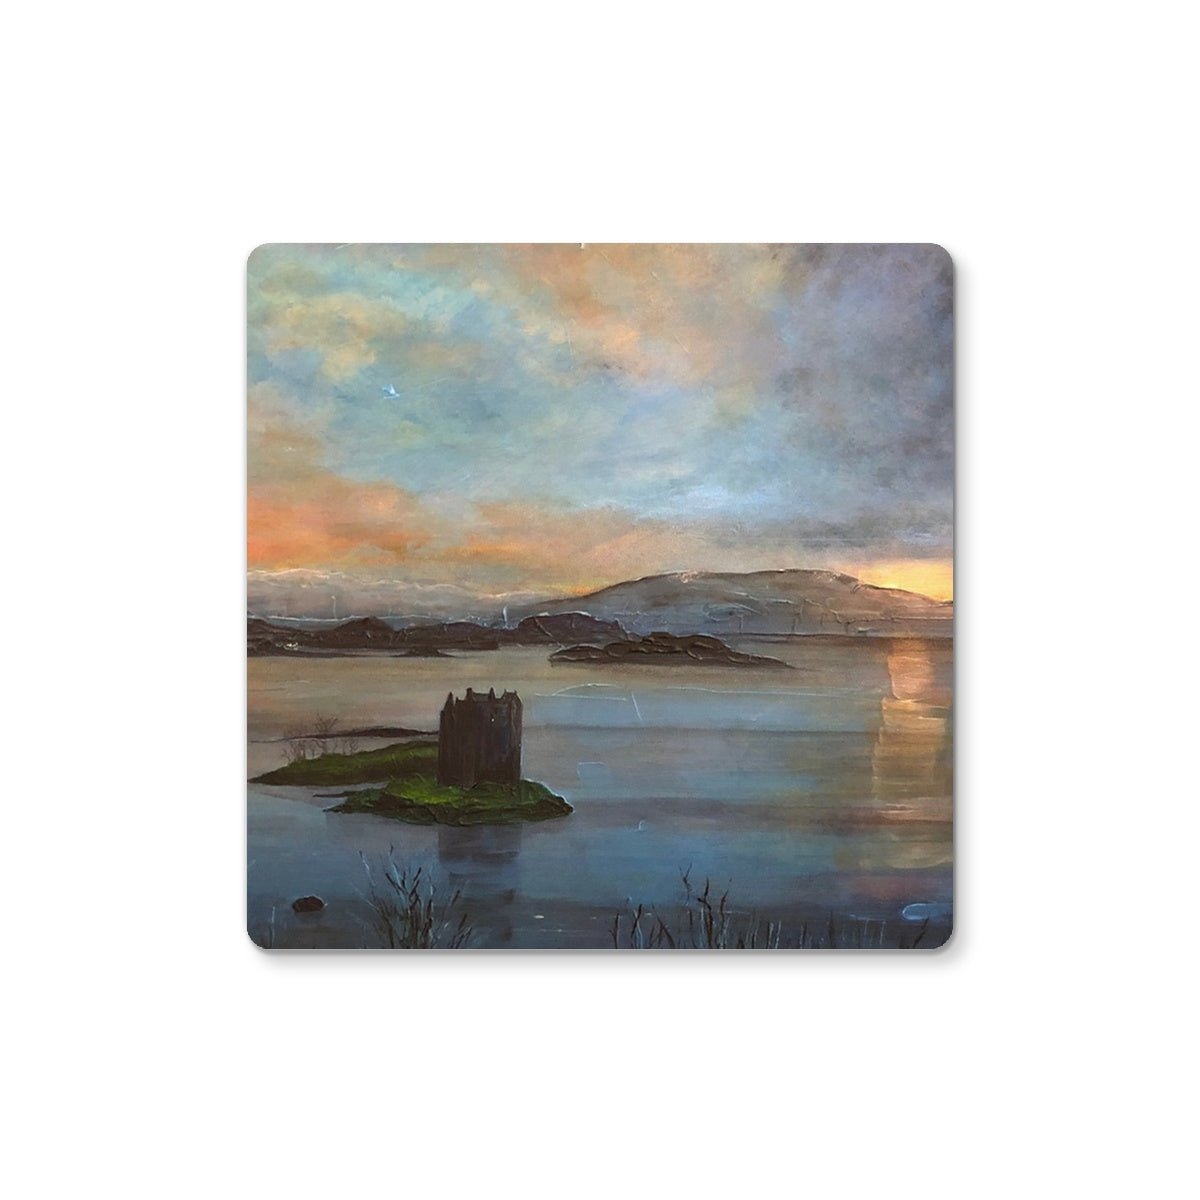 Castle Stalker Twilight Art Gift Coaster-Coasters-Historic & Iconic Scotland Art Gallery-Single Coaster-Paintings, Prints, Homeware, Art Gifts From Scotland By Scottish Artist Kevin Hunter